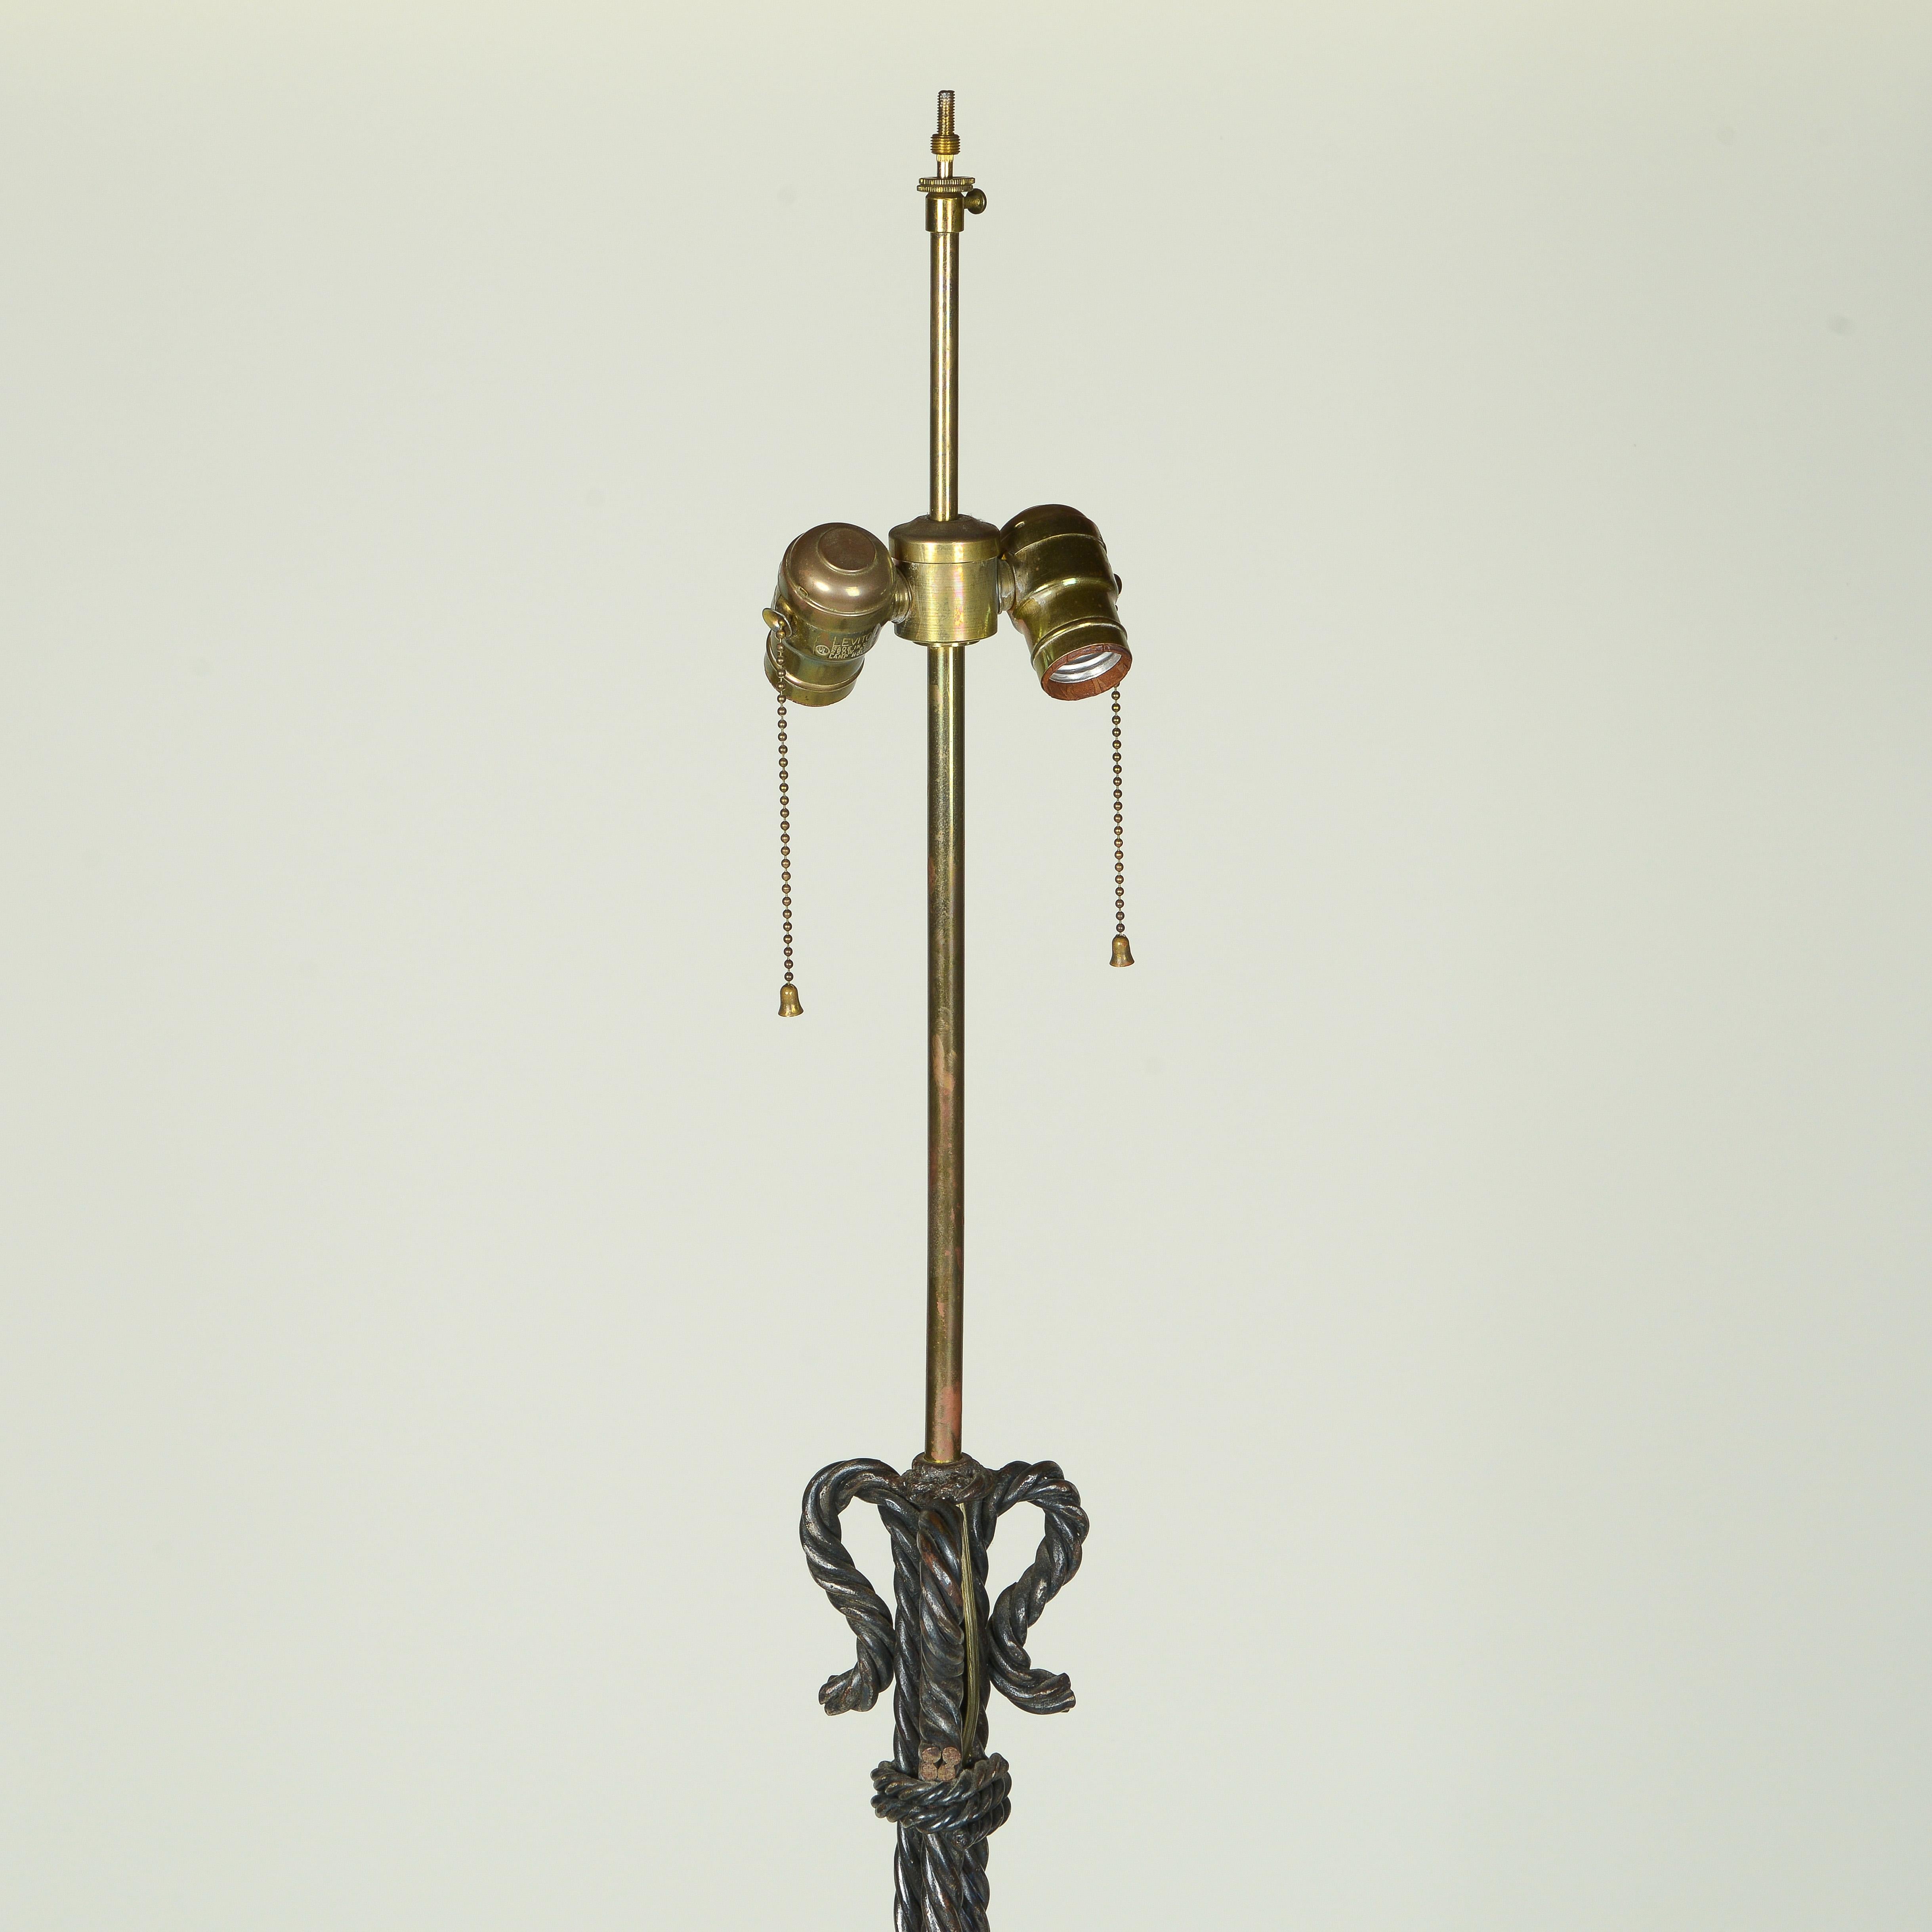 Mid-20th Century French Wrought Iron Floor Lamp For Sale